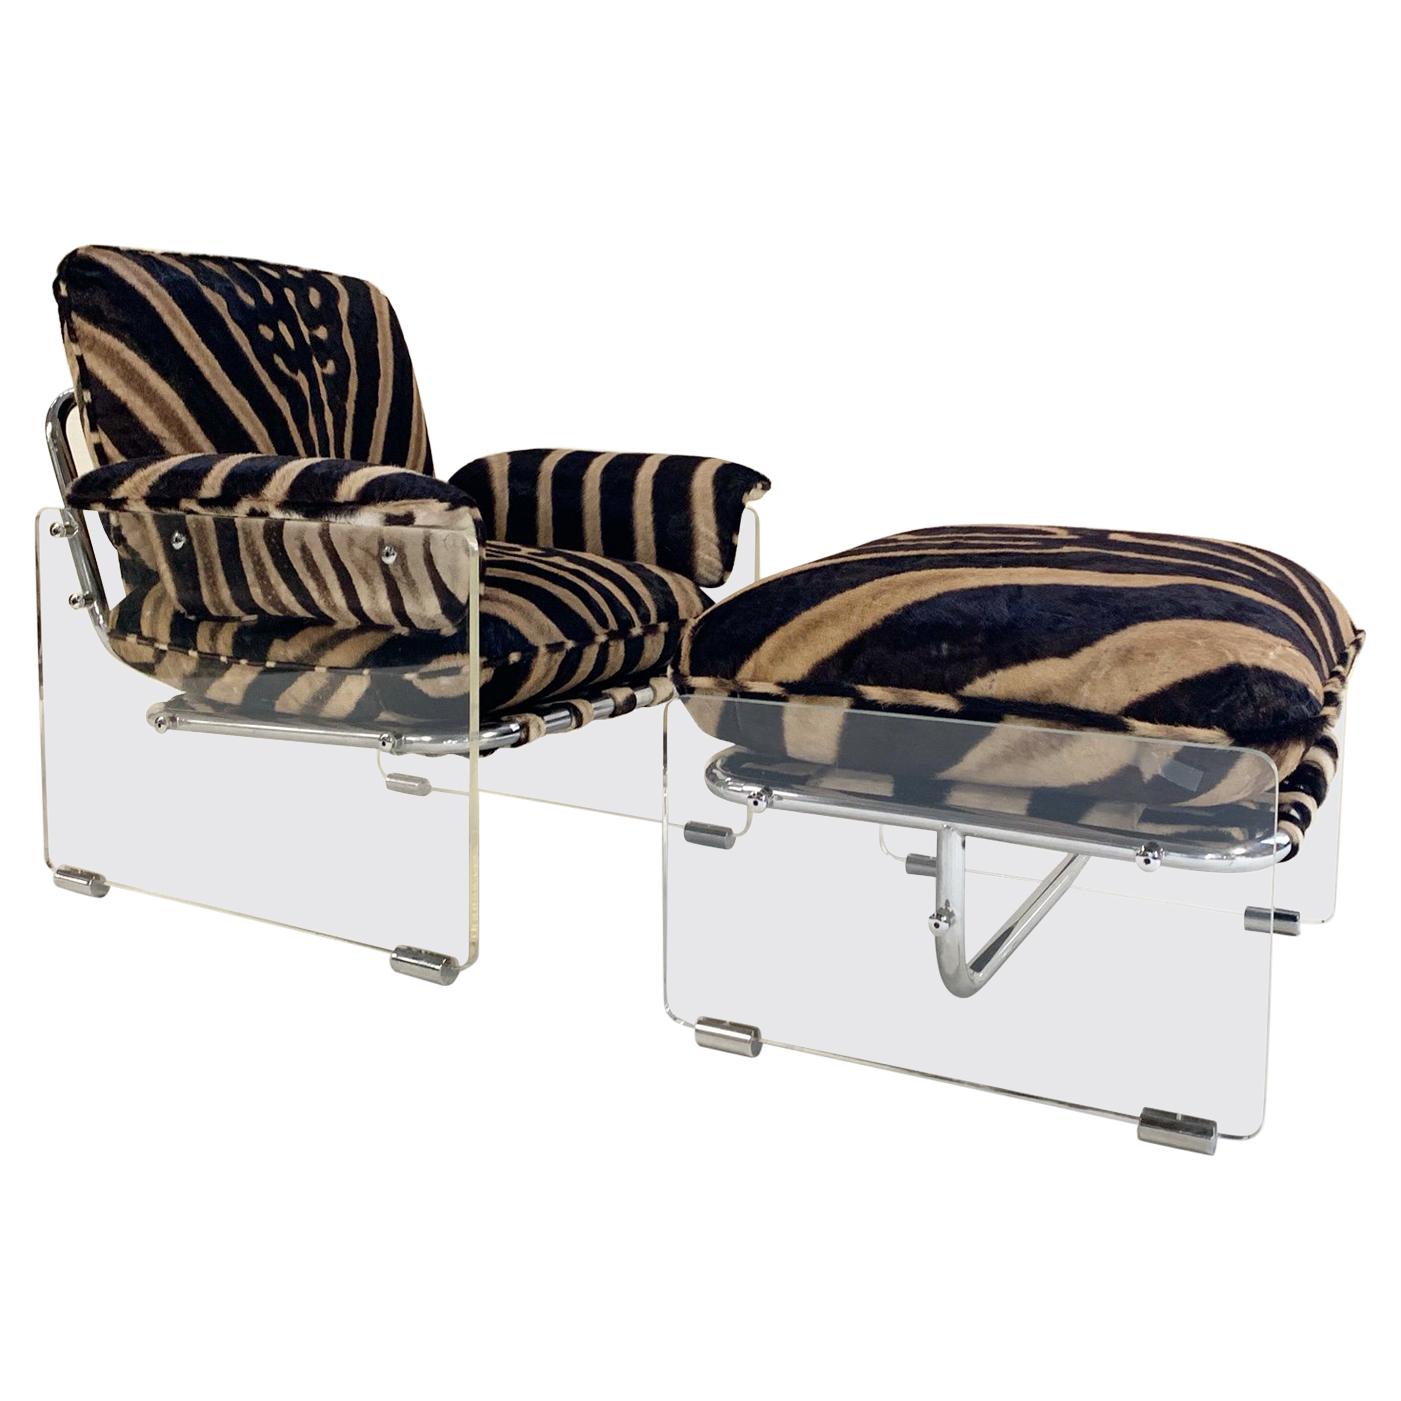 Pace Collection Argenta Lucite and Chrome Lounge Chair and Ottoman in Zebra Hide